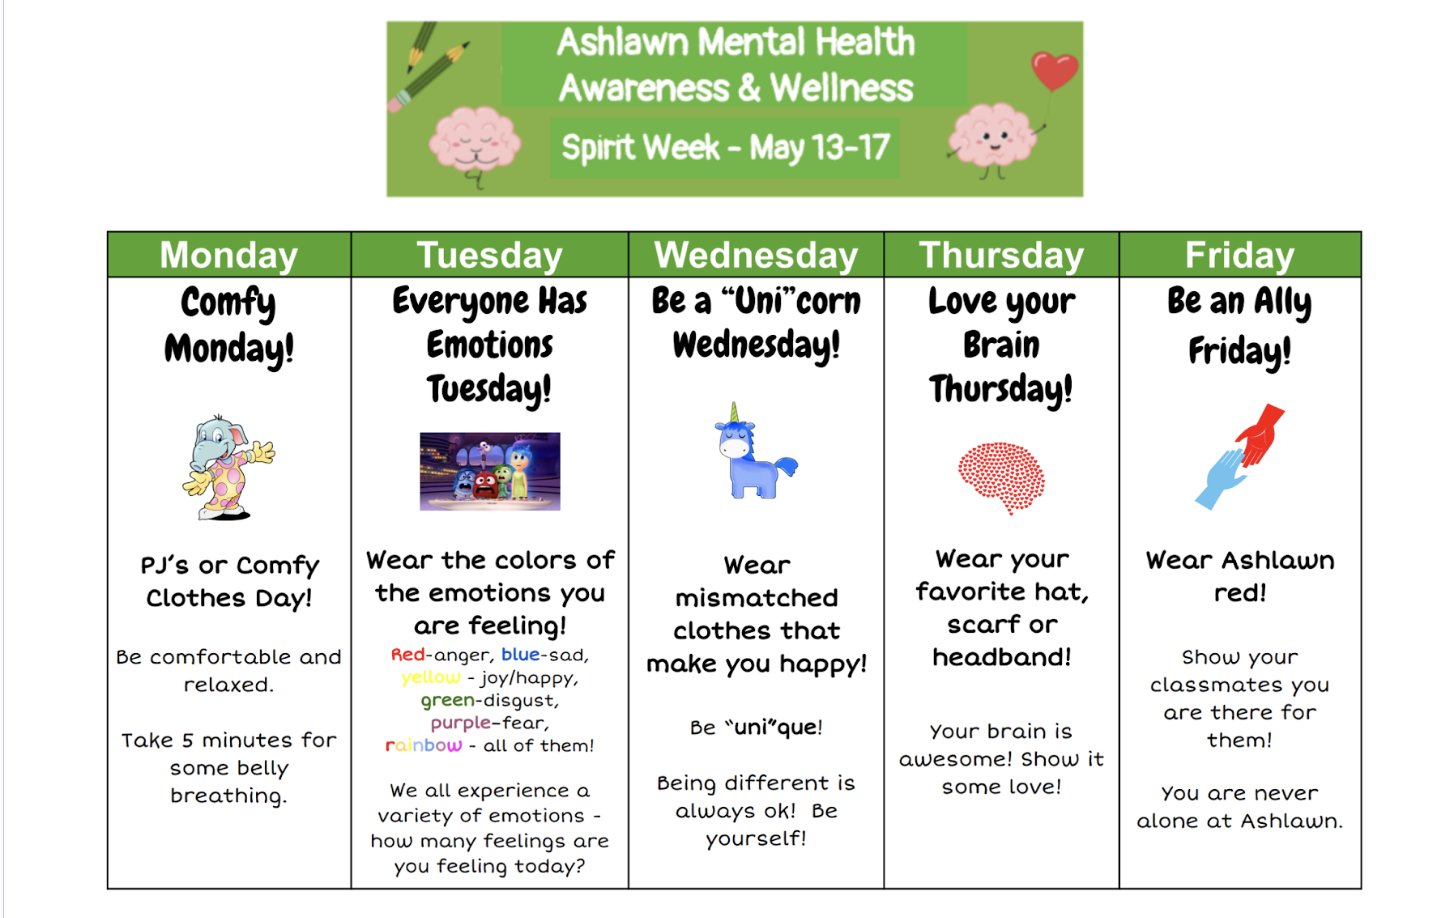 Ashlawn Mental Health & Awareness Spirit Week May 13th - May 17th Monday - Comfy Monday (PJs or Comfy clothes day) Tuesday - Everyone has emotions! (Wear the colors of the emotions you are feeling) Wednesday - Be a "Uni" corn Wednesday (Wear mismatched clothes that make you happy) Thursday - Love your brain Thursday (Wear your favorite hat, scarf, or headband) Friday - Be an ally Friday (Wear your Ashlawn red)